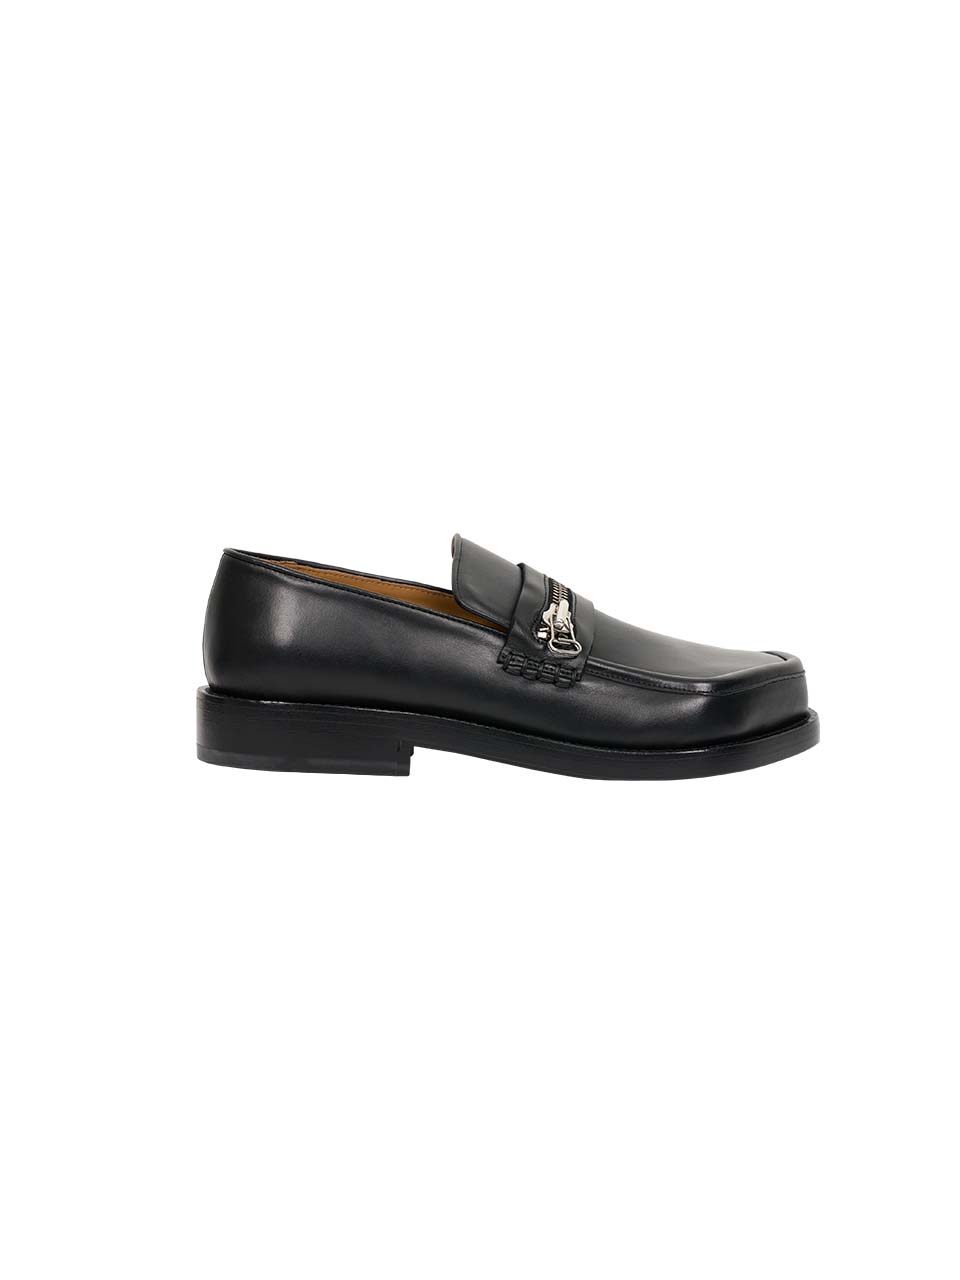 MAGLIANO - ZIPPED MONSTER LOAFER (BLACK)